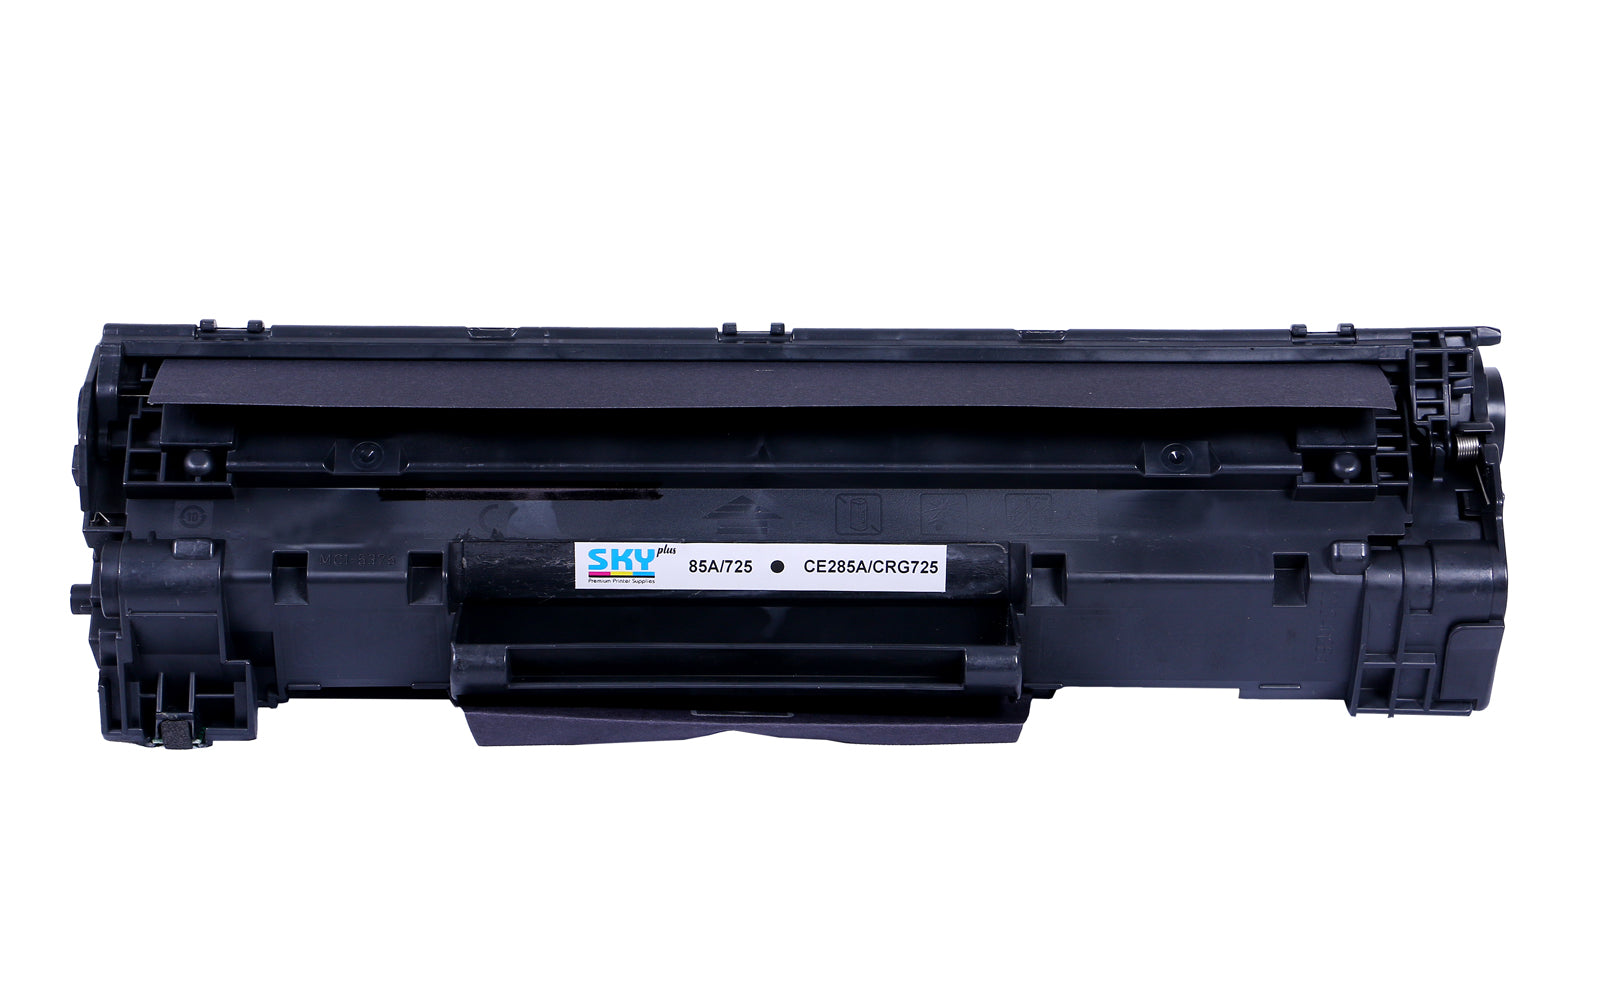 Sky Plus 725 Remanufactured Toner Cartridge for LBP6000 6020 and MF3010